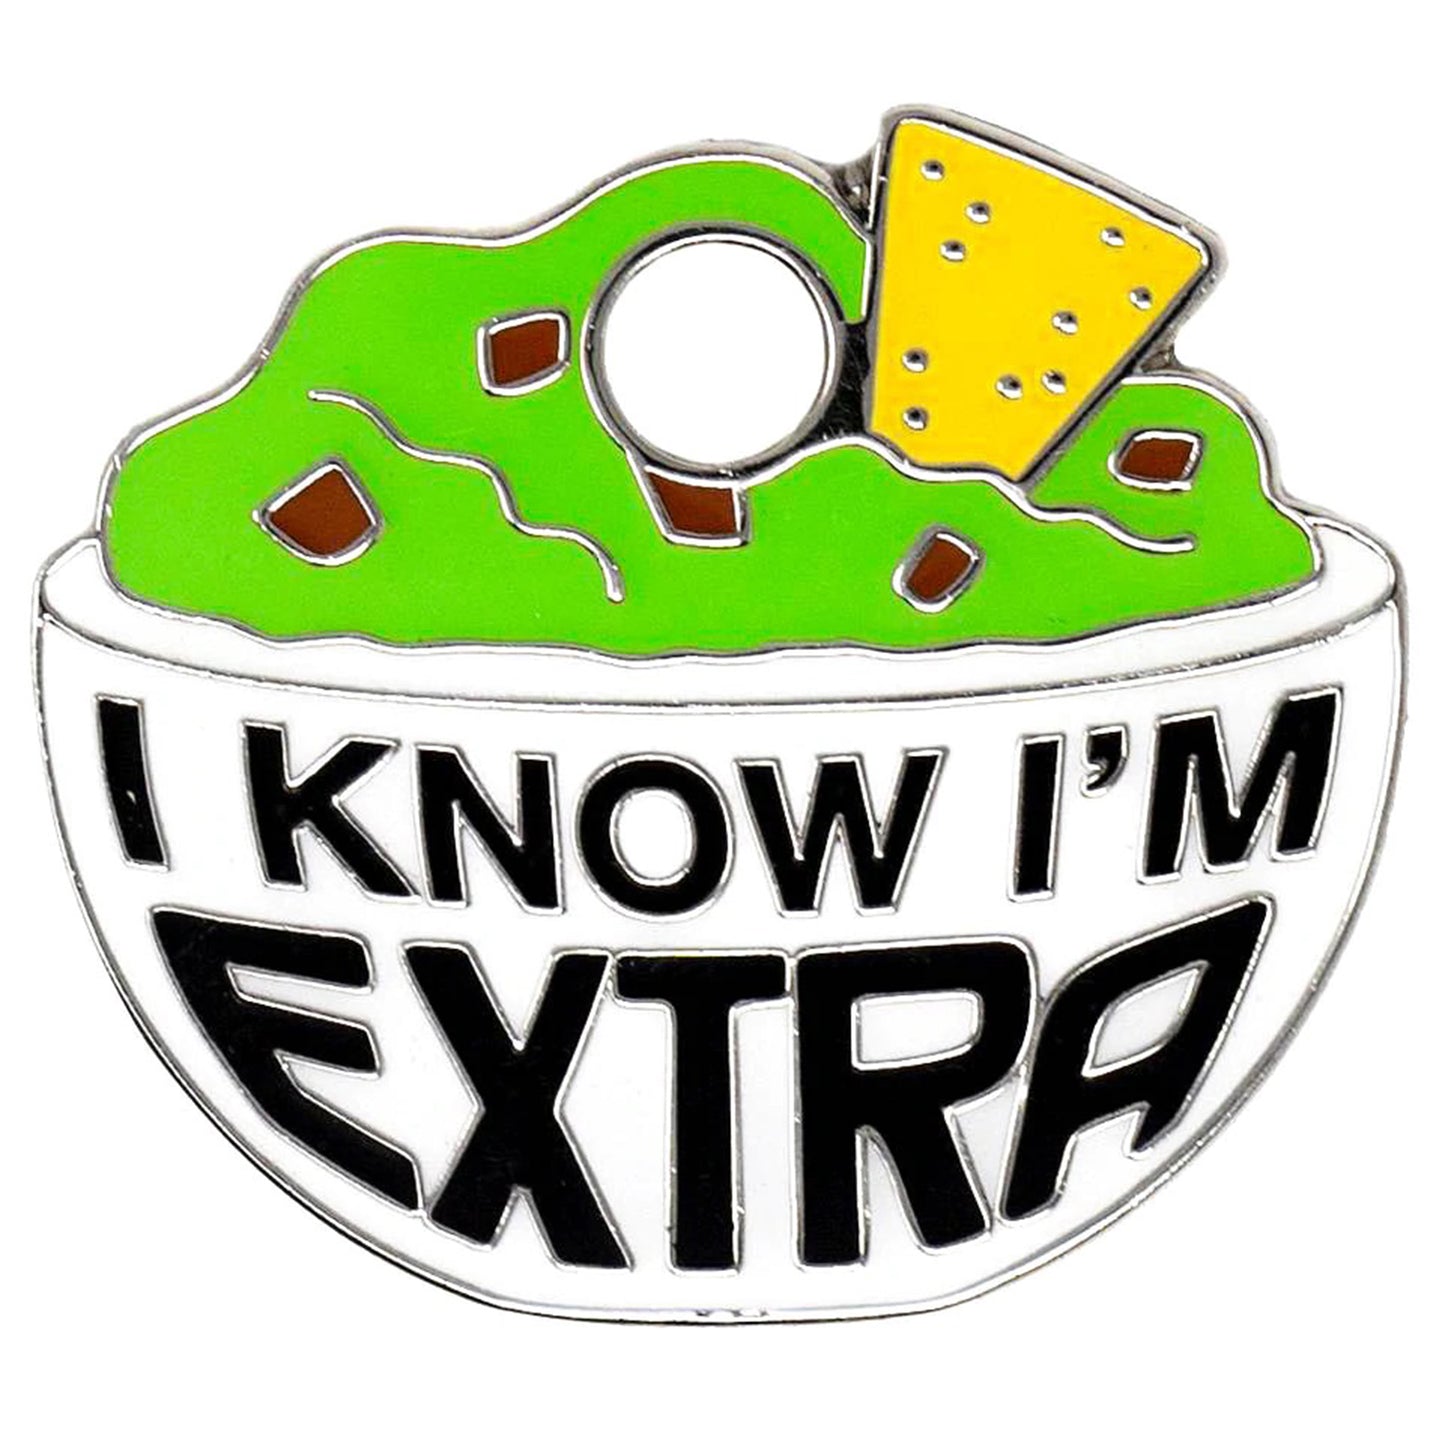 Extra Guacamole Tag - green and silver enamel pet id tag says I know I'm extra | trill paws